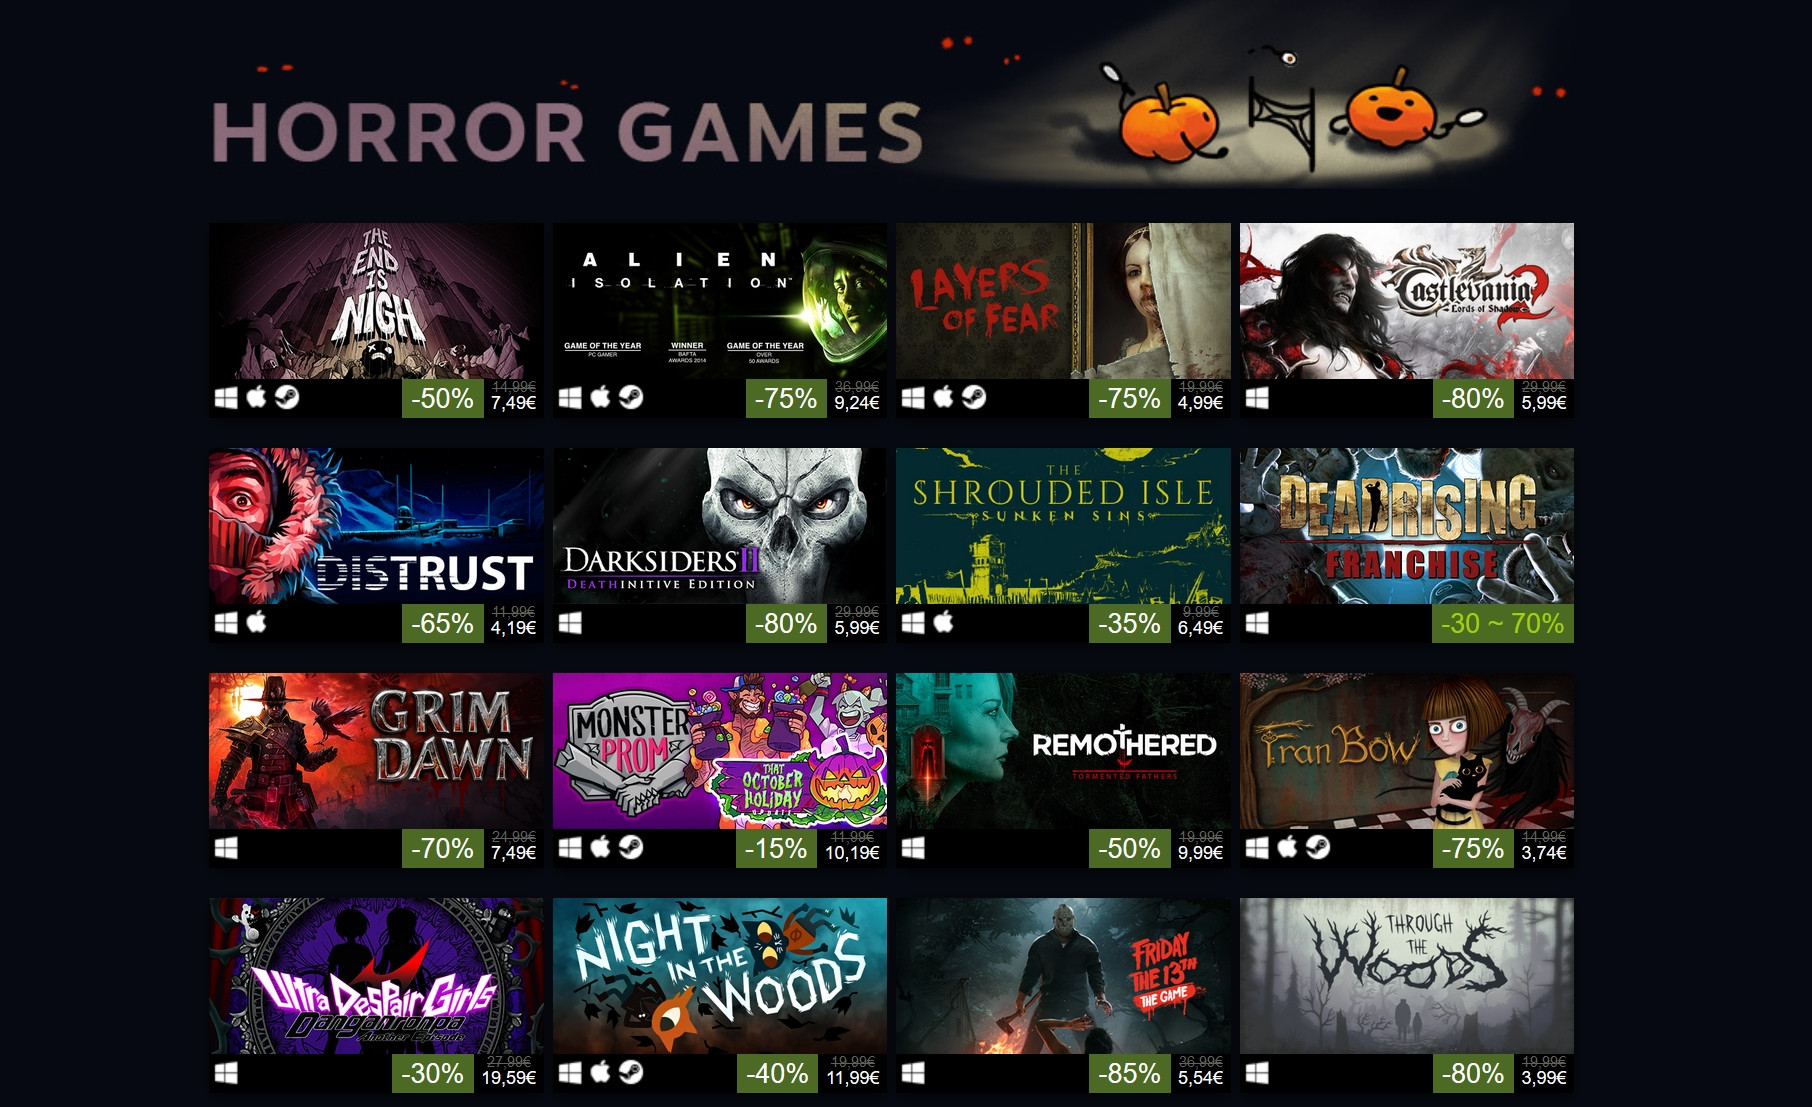 Steam Halloween Sale 18 Is On Up To 85 Off In Some Titles Techpowerup Forums